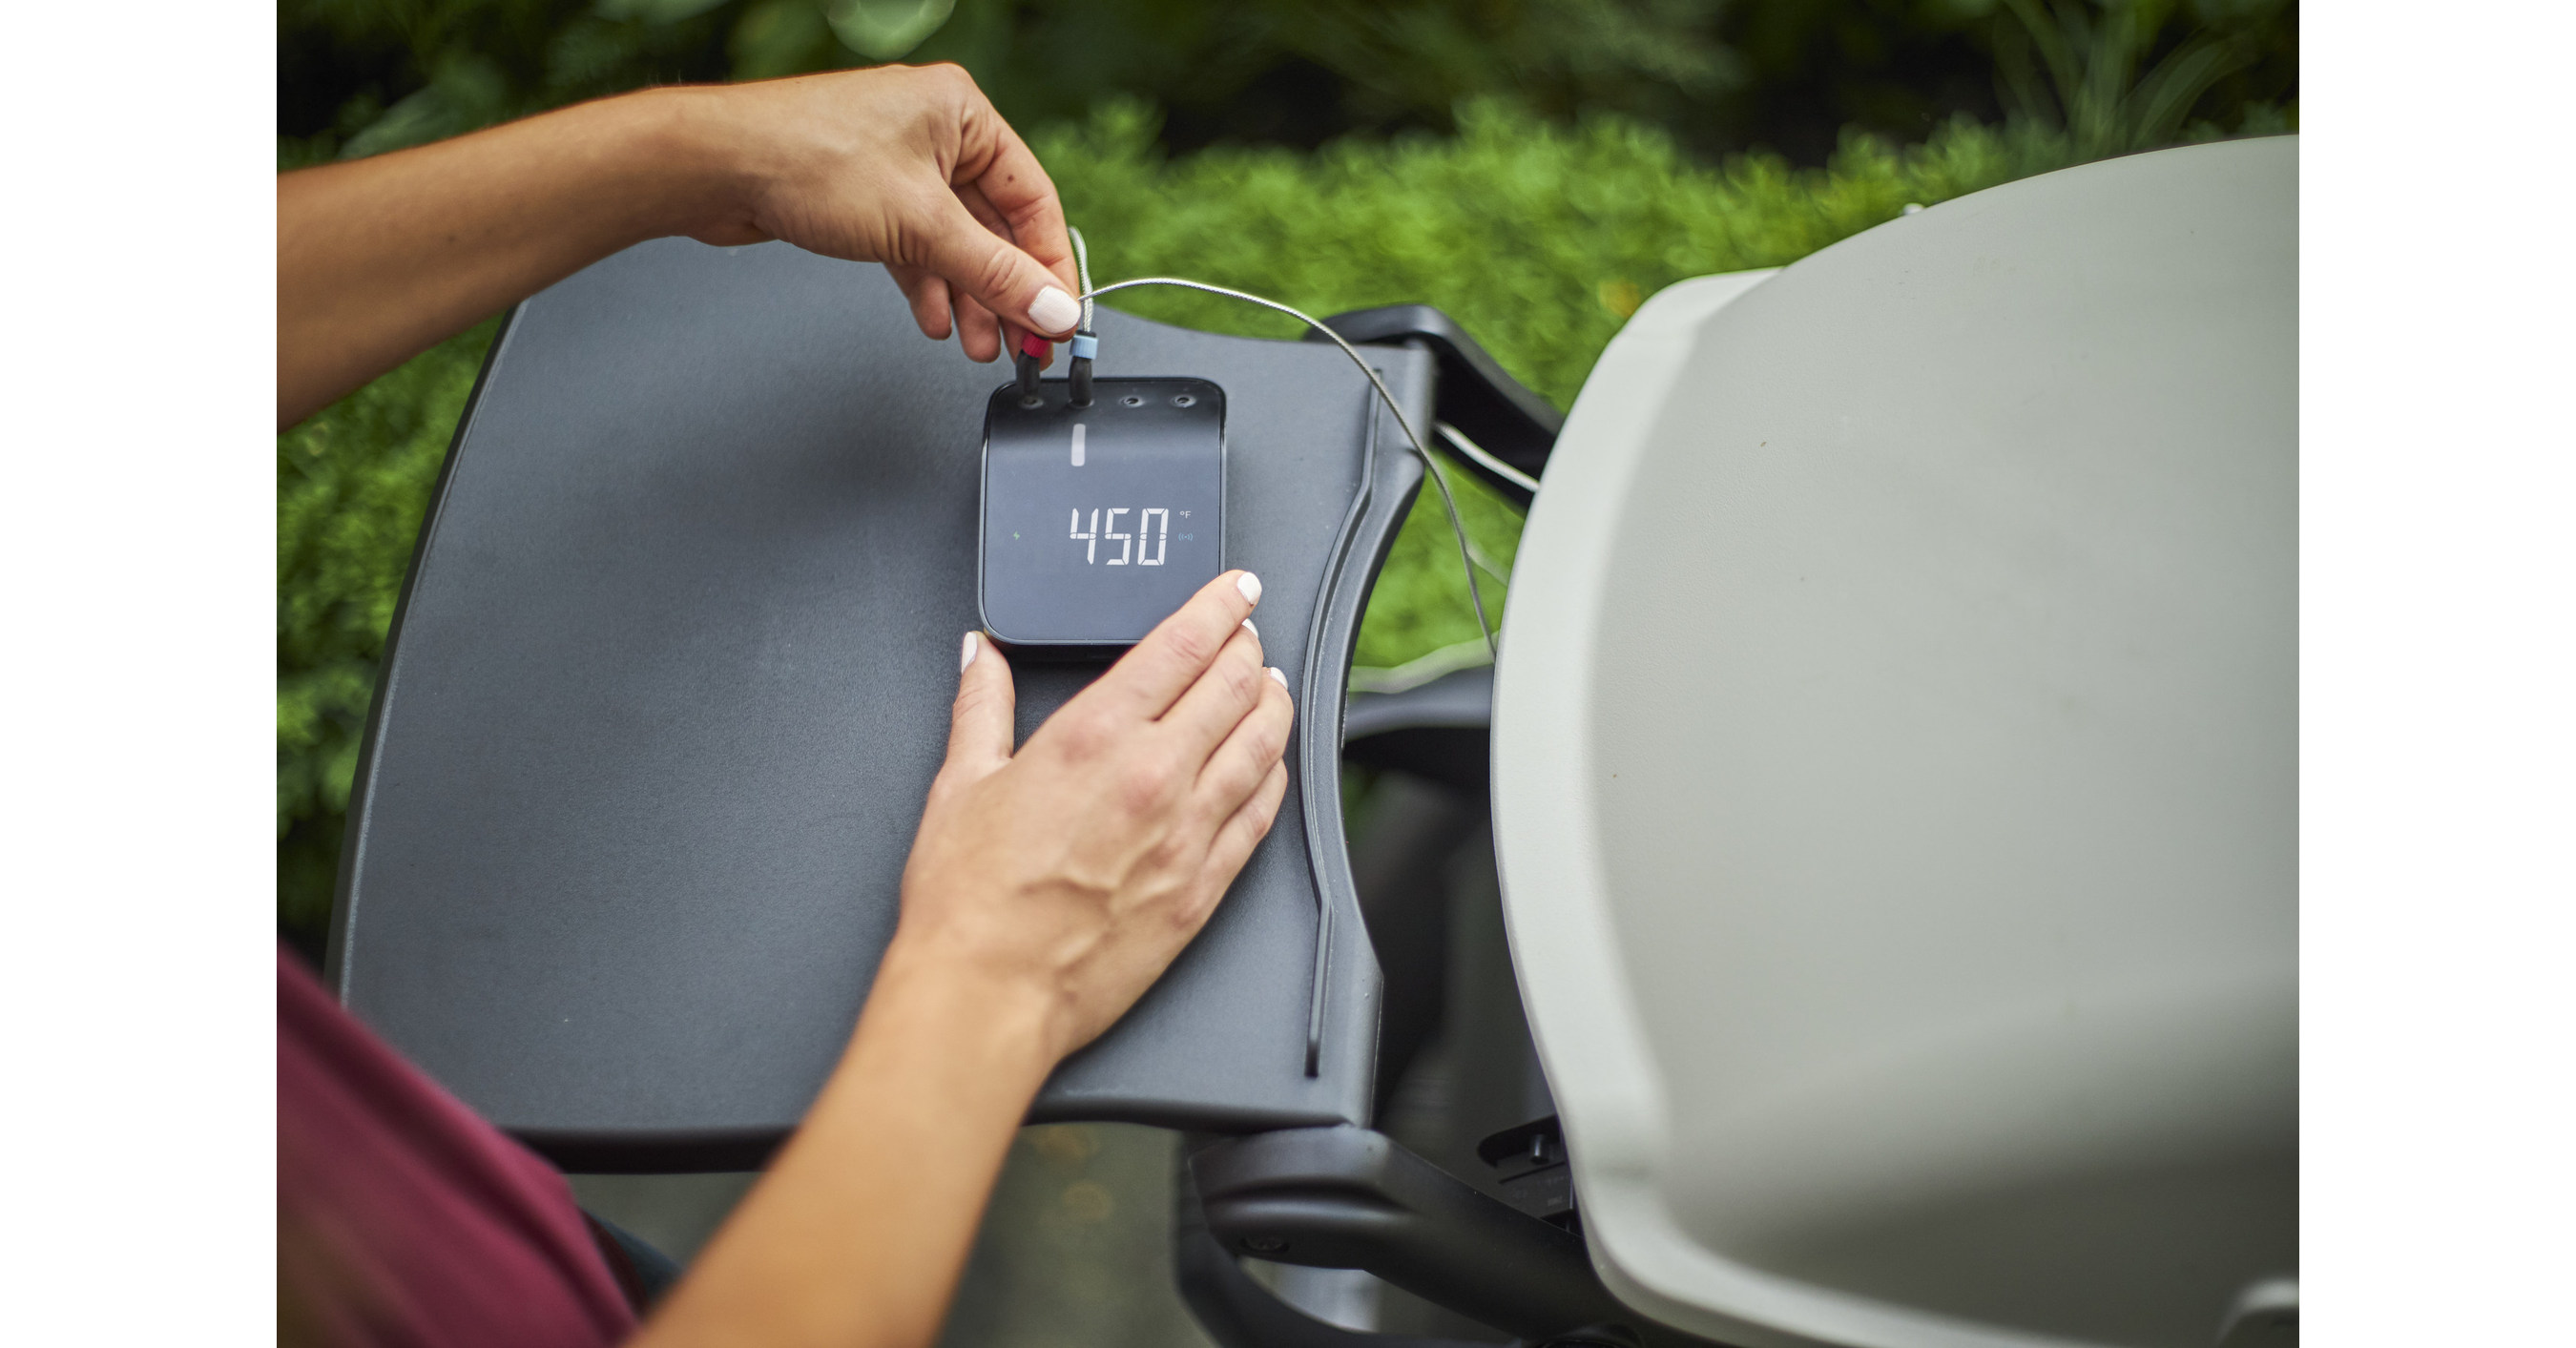 New Weber Connect™ Smart Grilling Hub Turns Any Grill into a Smart Grill